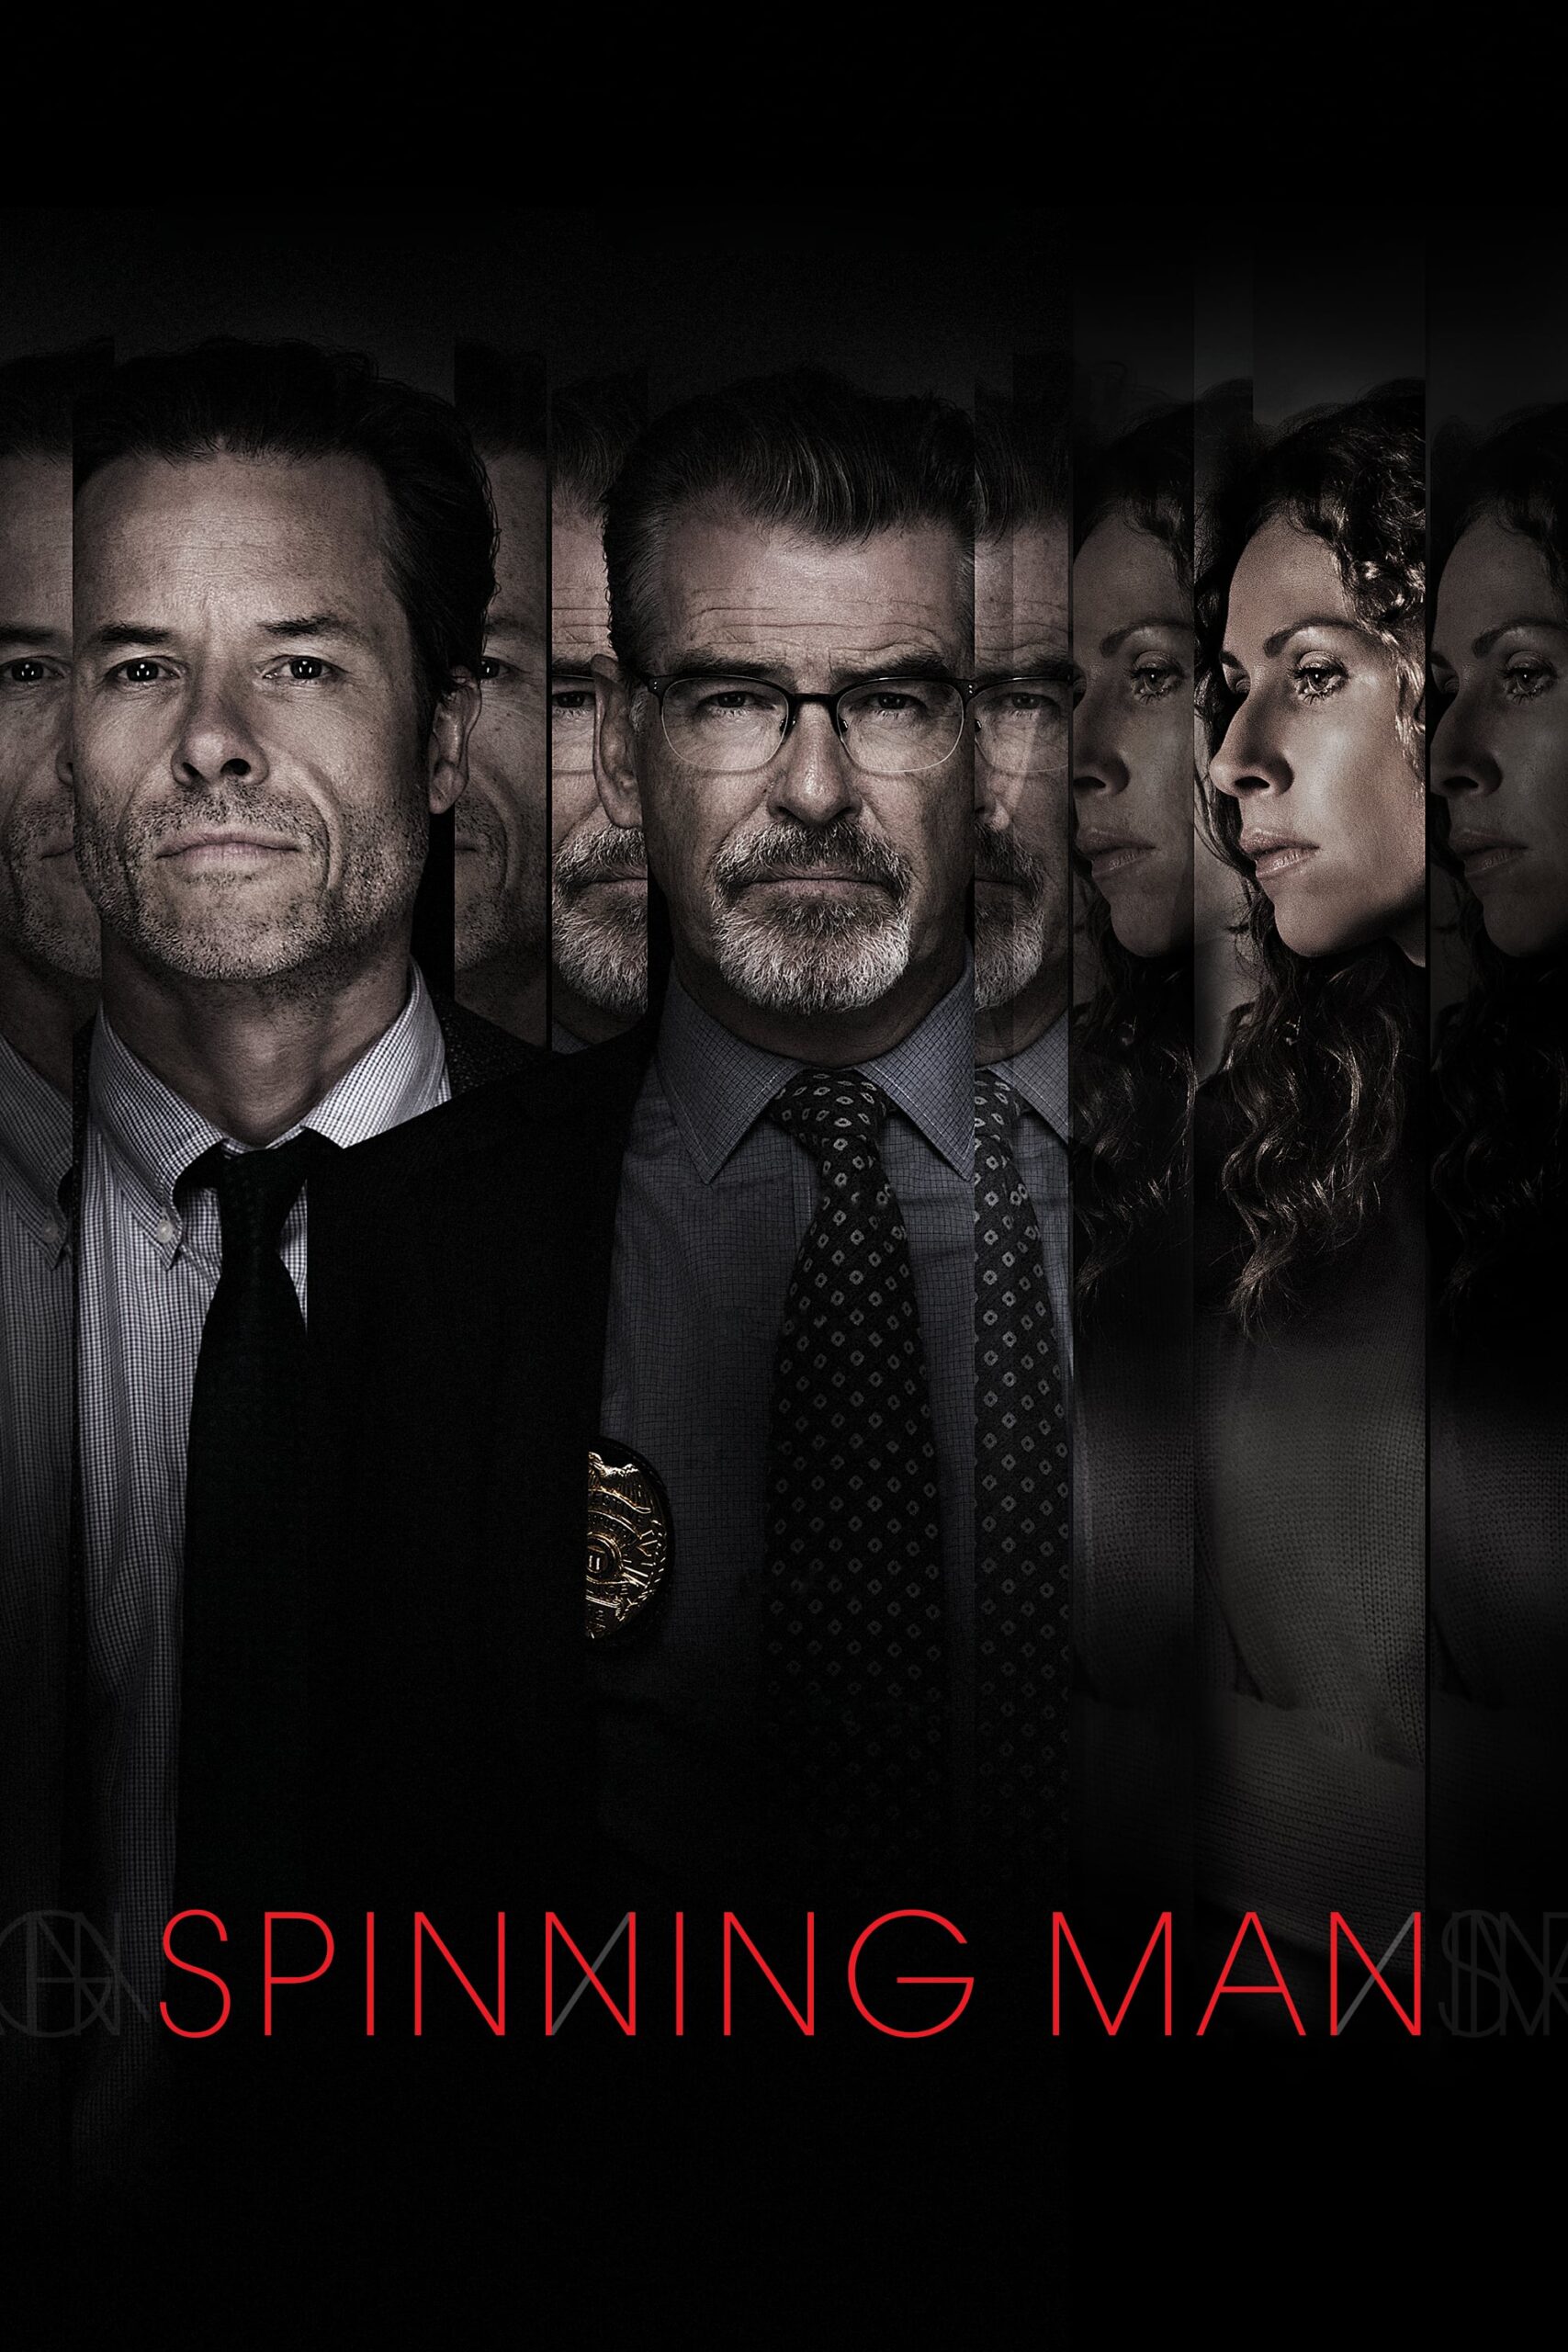 Poster for the movie "Spinning Man"